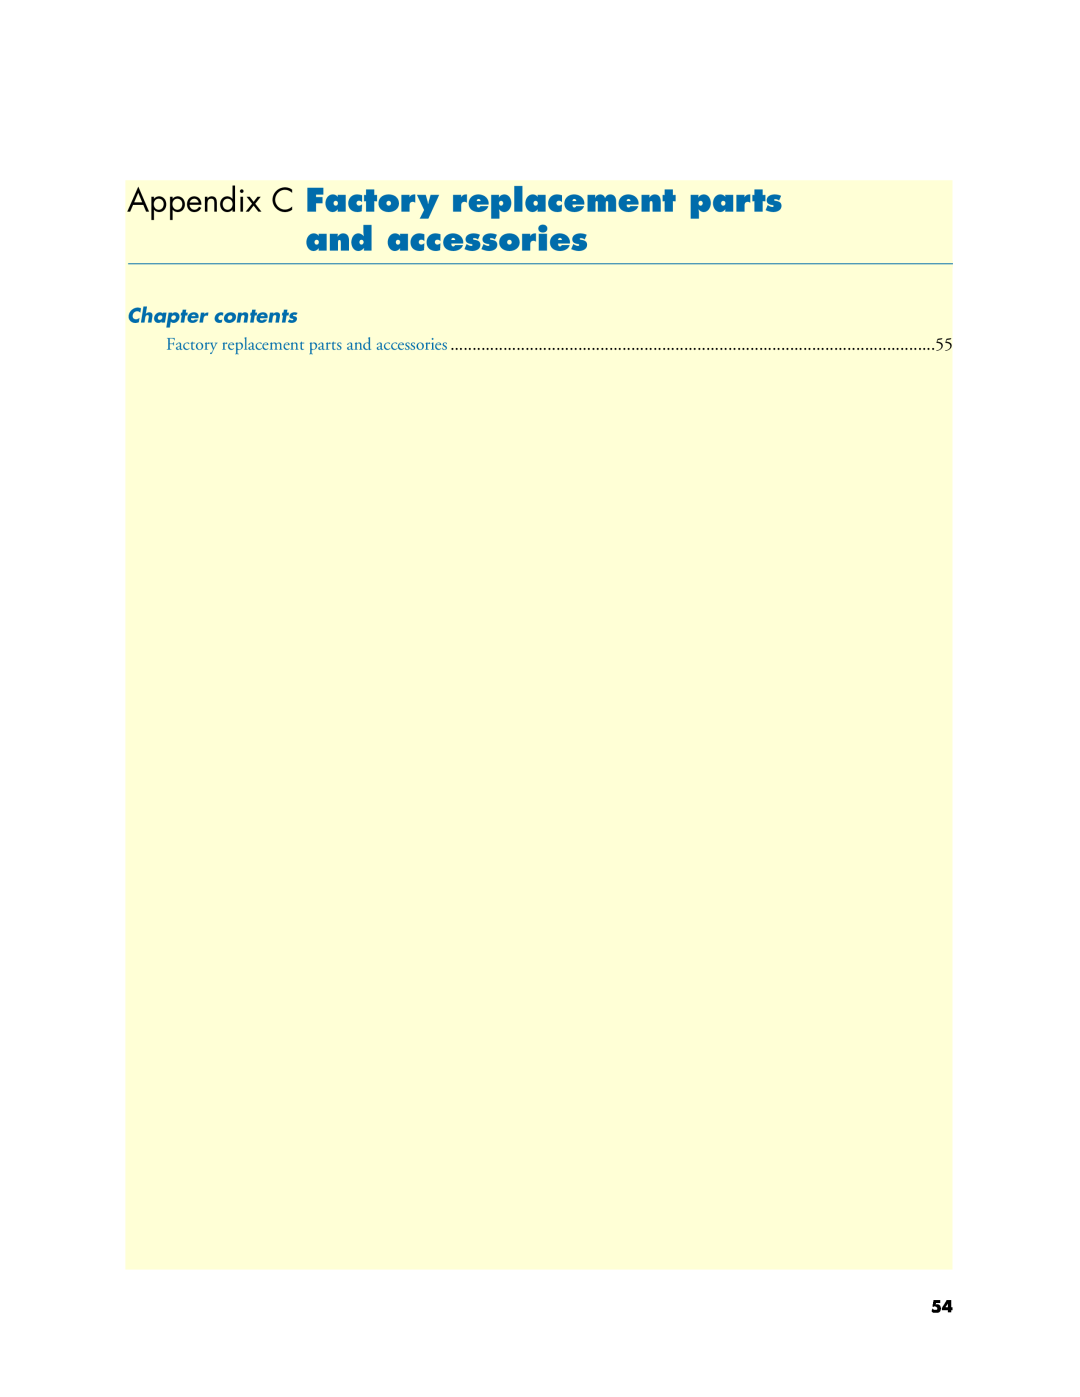 Patton electronic Model 3088/I manual Appendix C Factory replacement parts and accessories, Chapter contents 